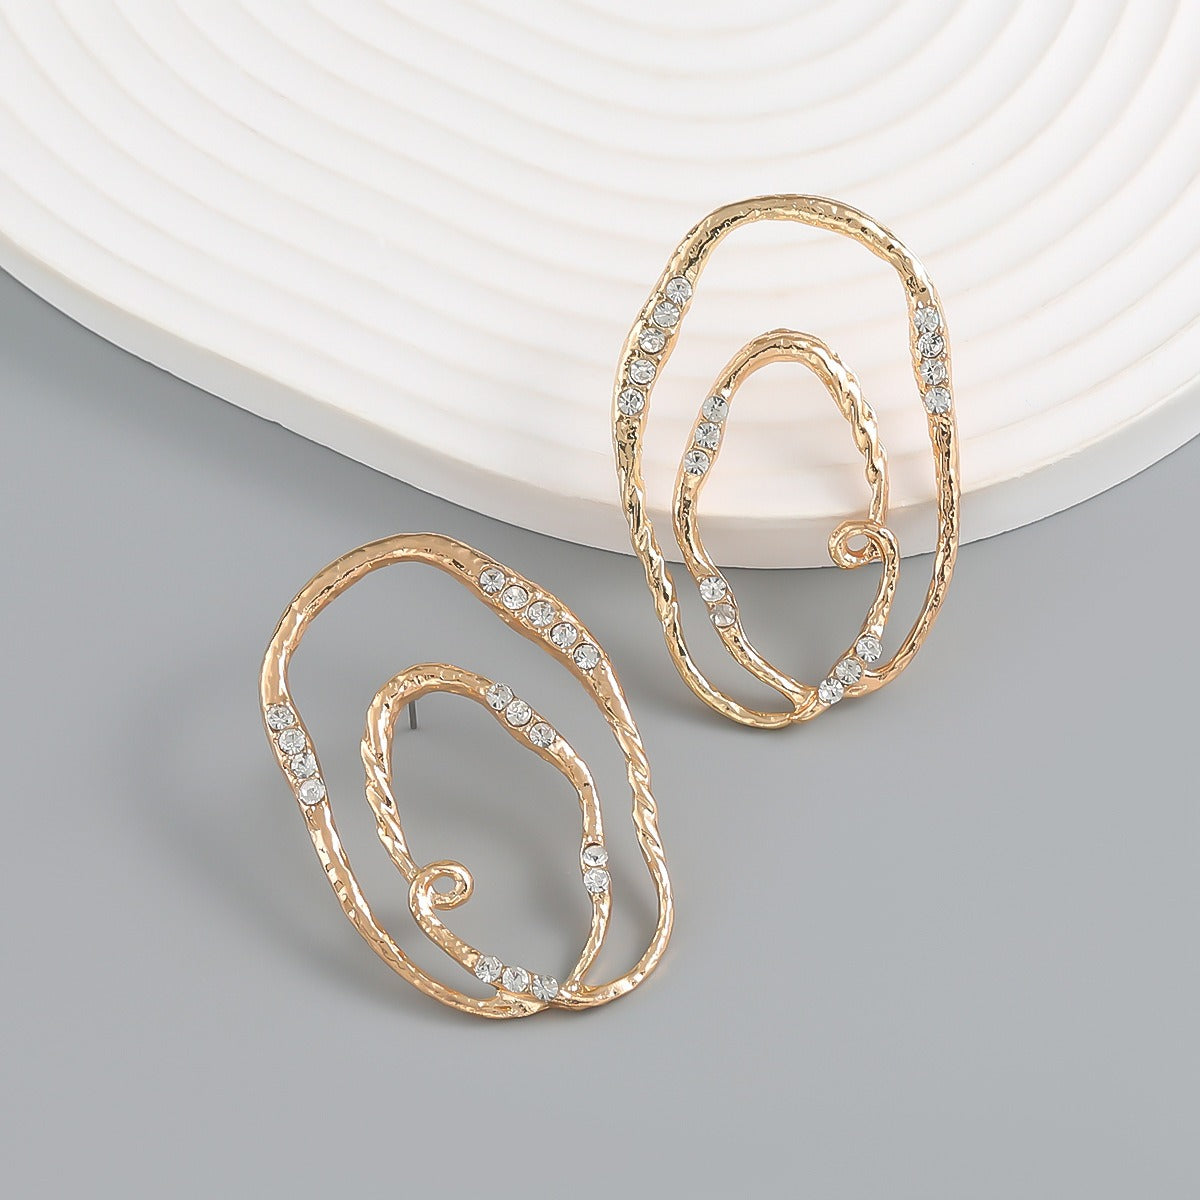 Alloy Multi-Layer Elliptical Exaggerated Earrings